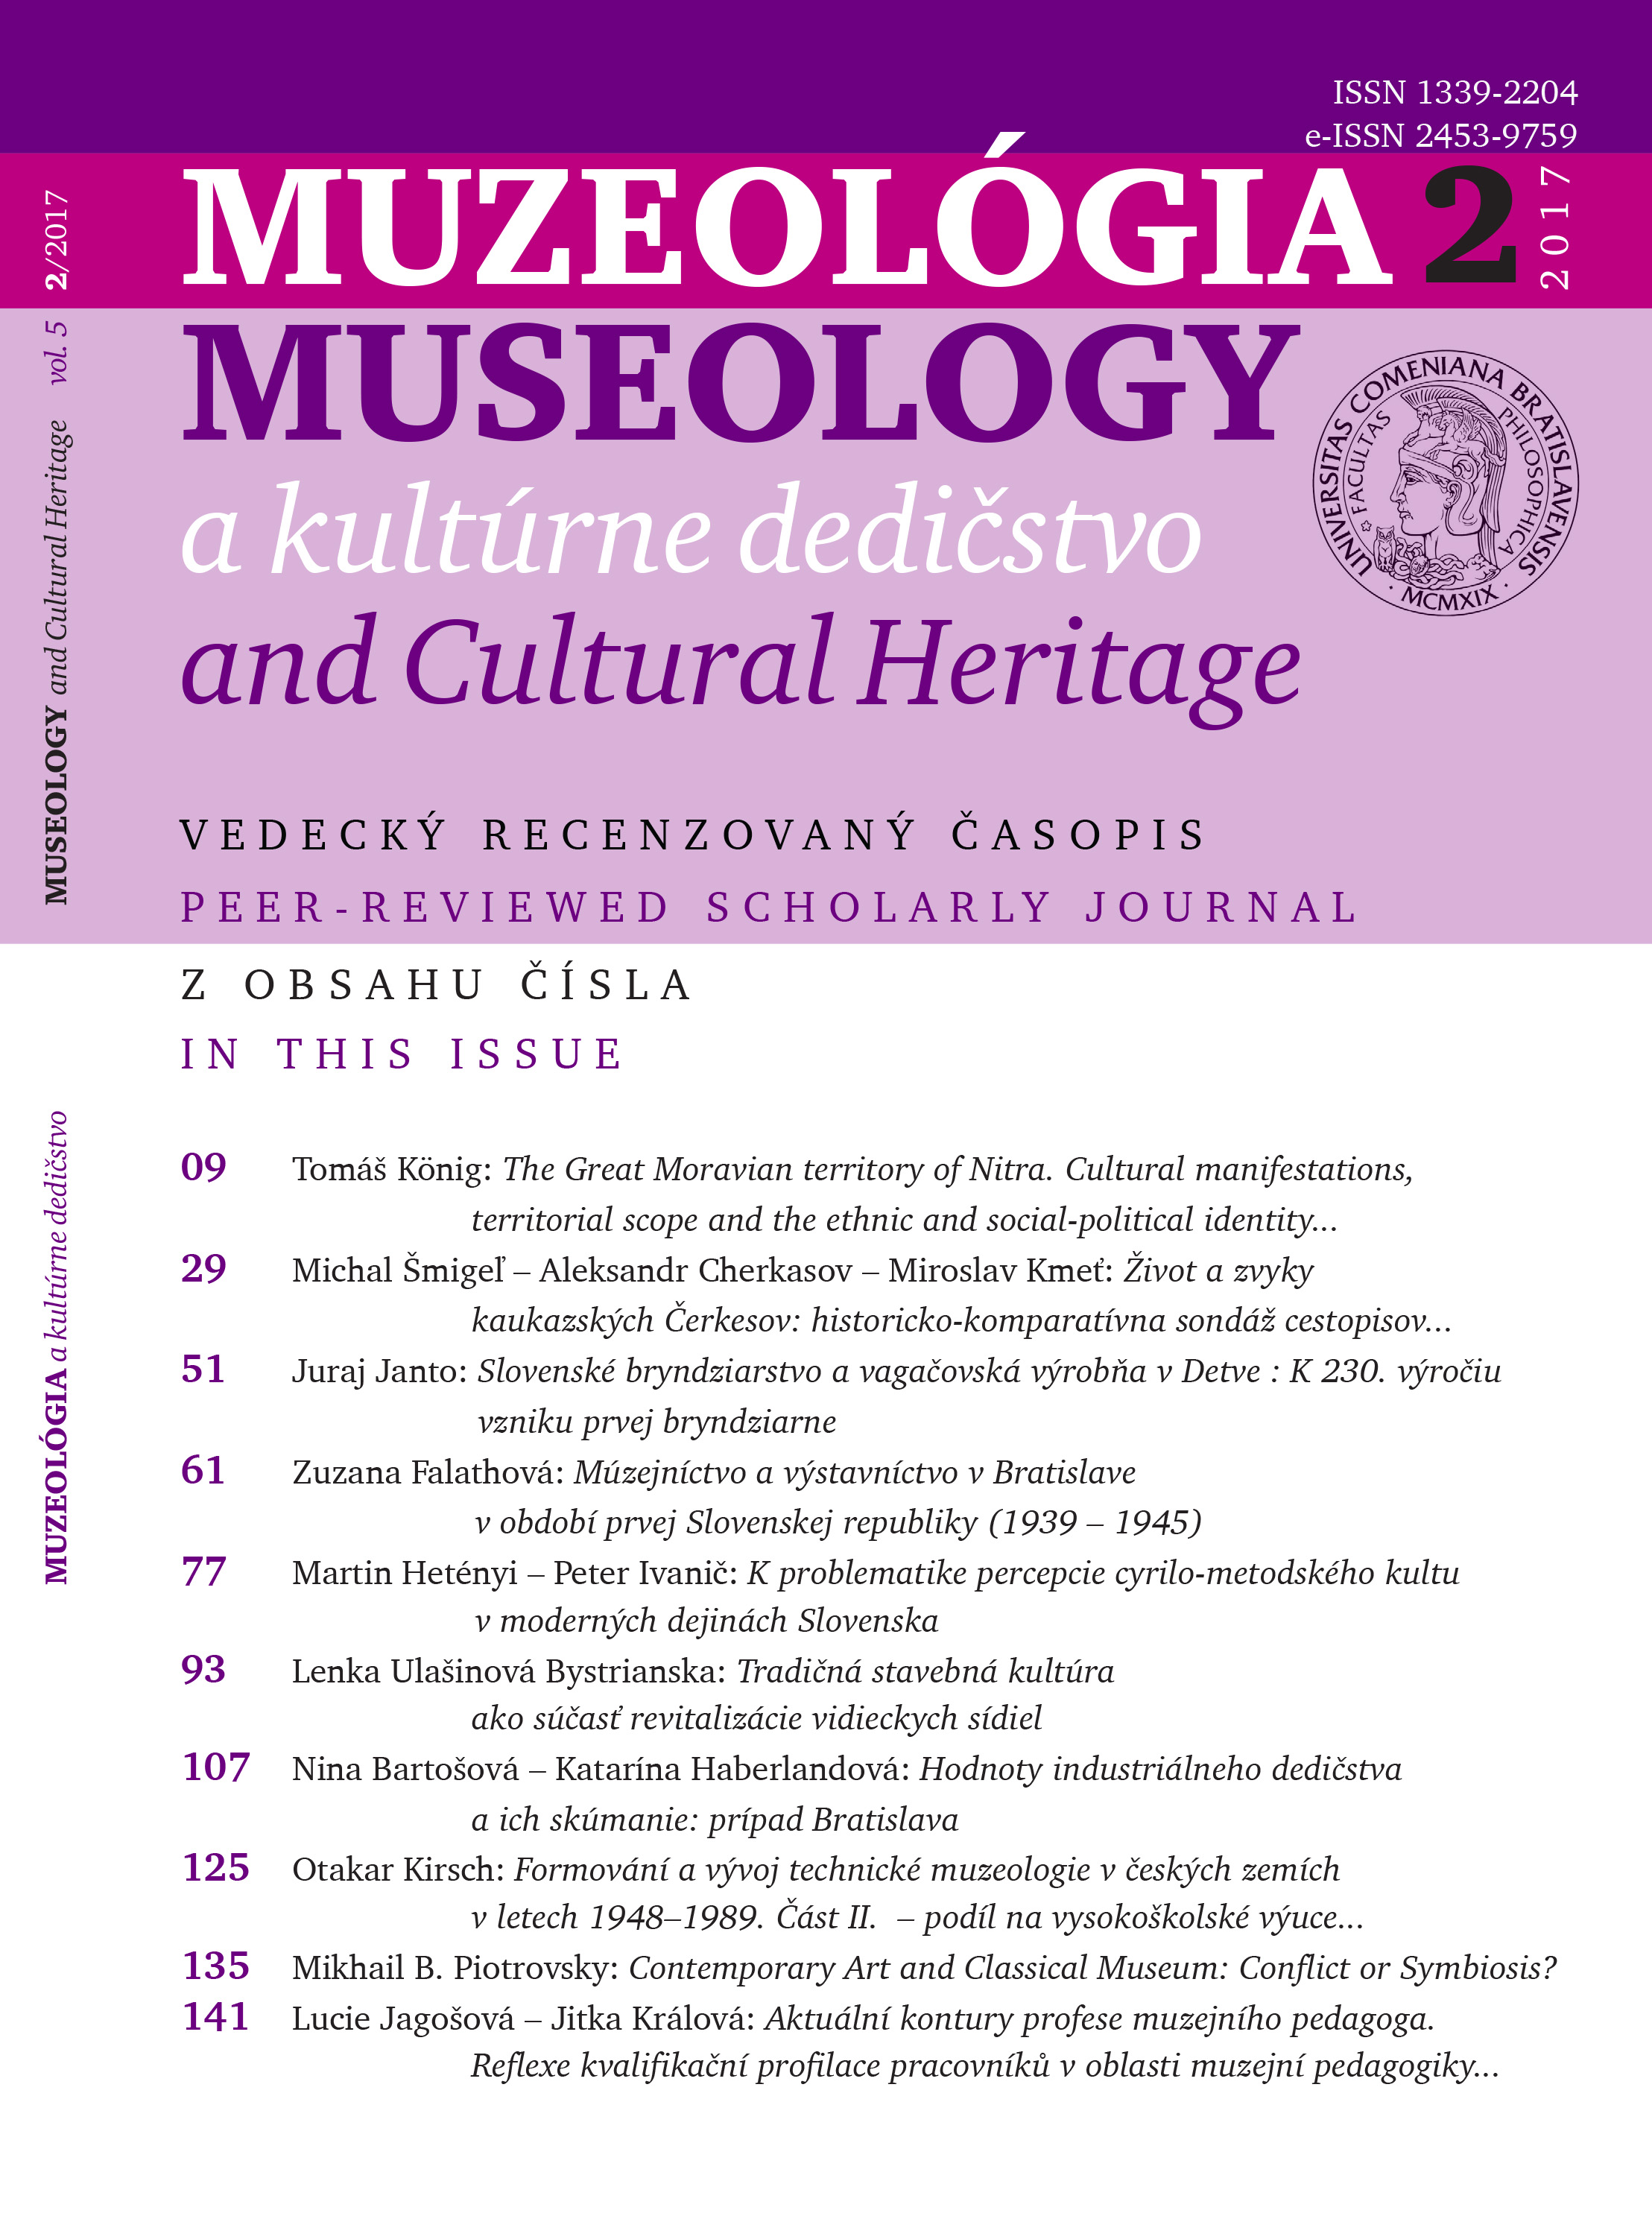 Current professional profile of a museum  pedagogue: qualifications of museum pedagogues in the requirements of the Committee for Public  Relations and Museum Pedagogy of the Czech Association of Museums and Galleries Cover Image